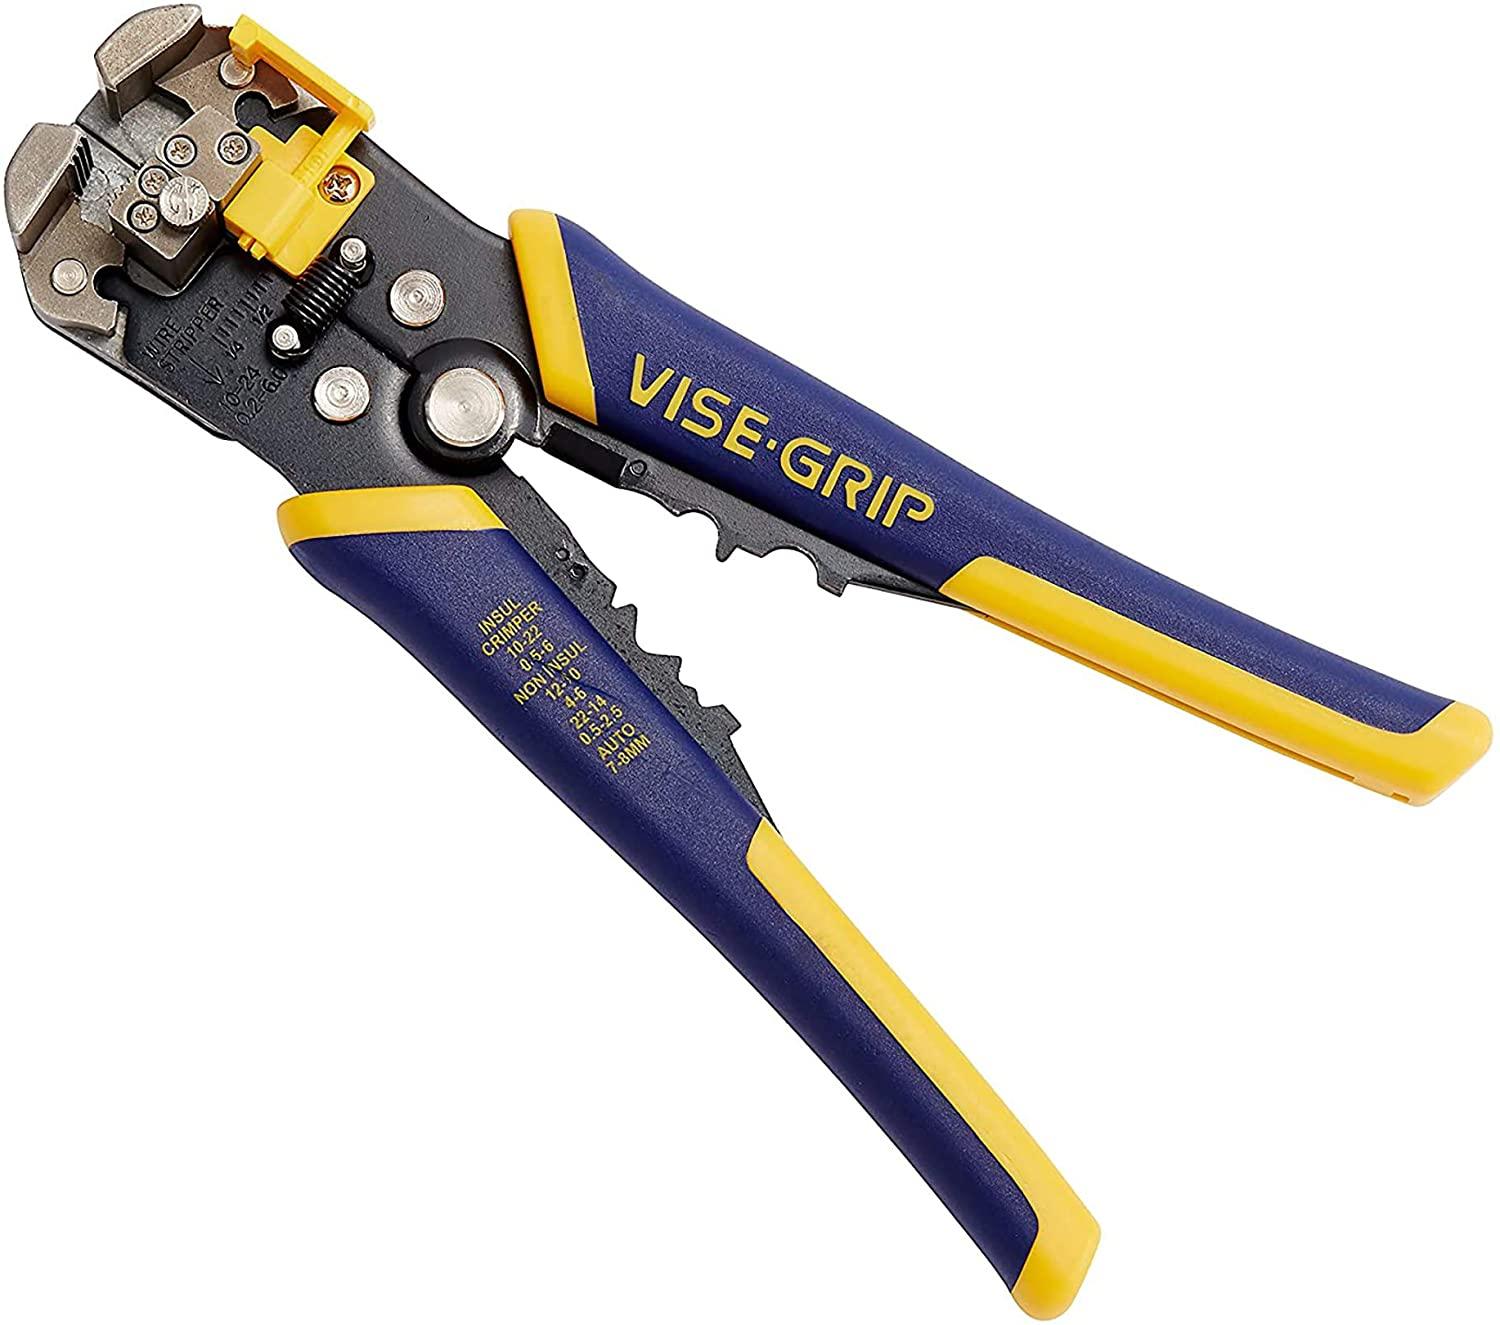 Irwin Vise-Grip 8in Self Adjusting Wire Stripper for $17.99